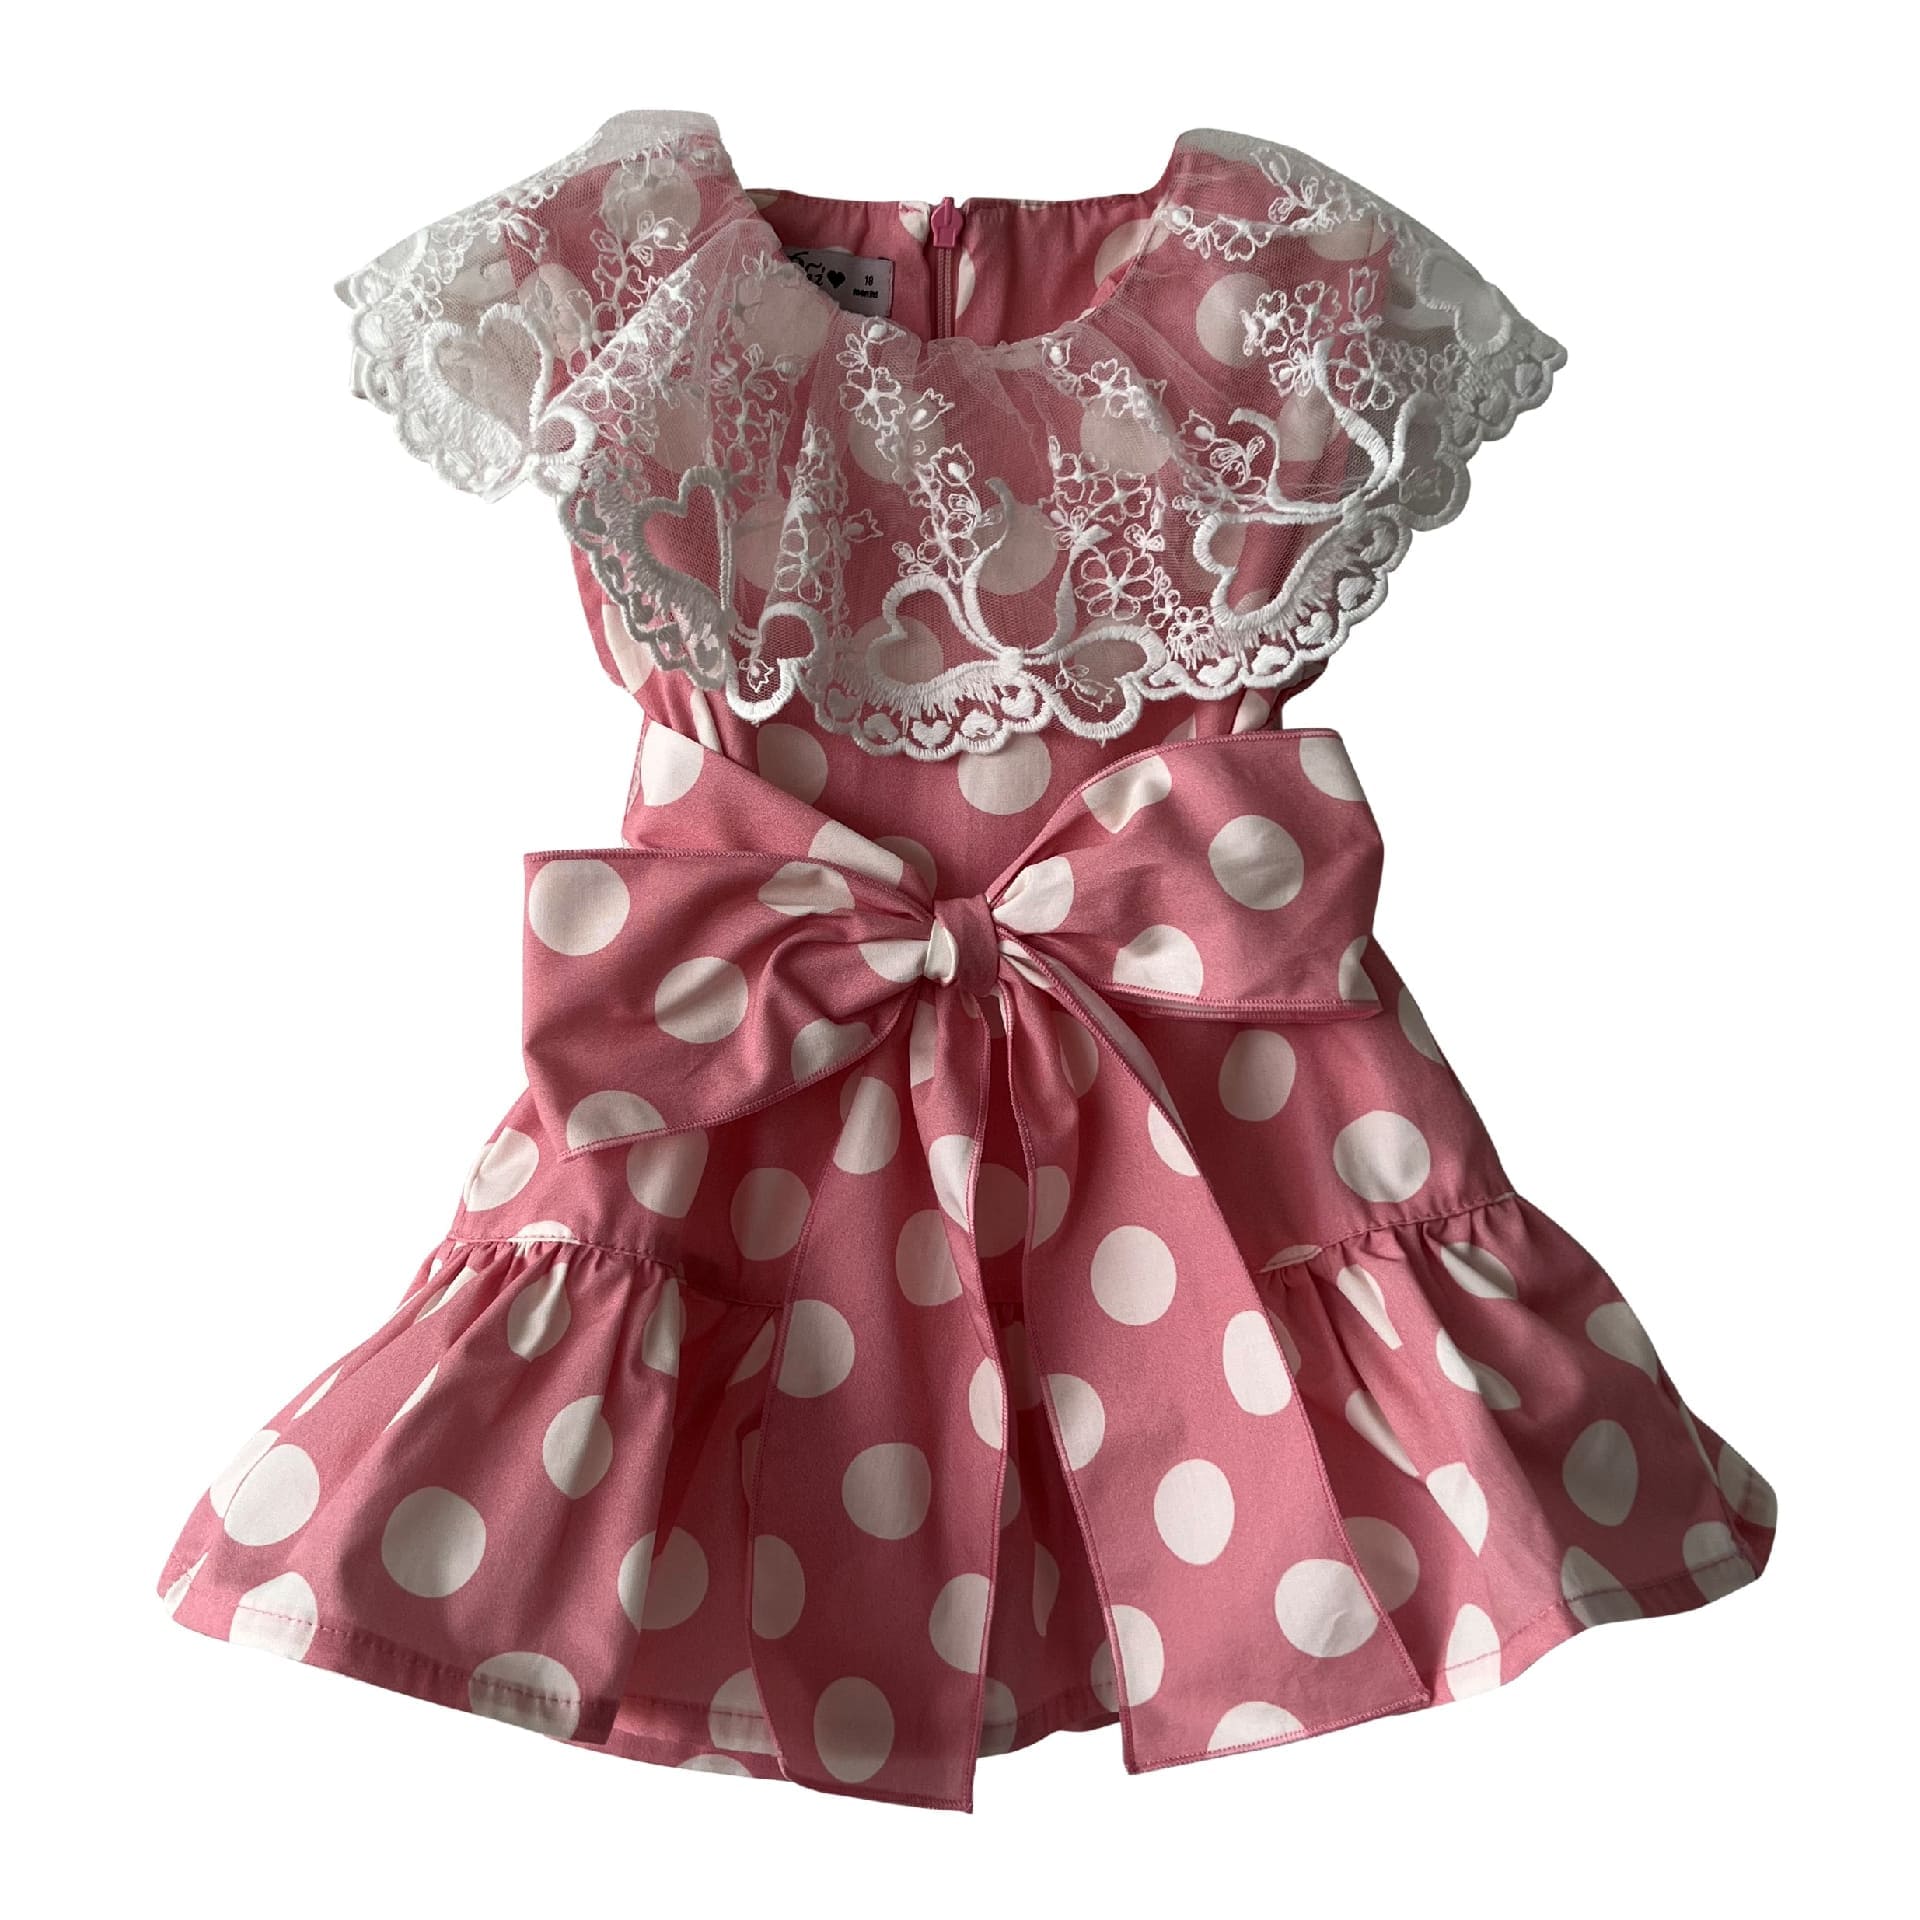 Pink with ivory dots dress with tule